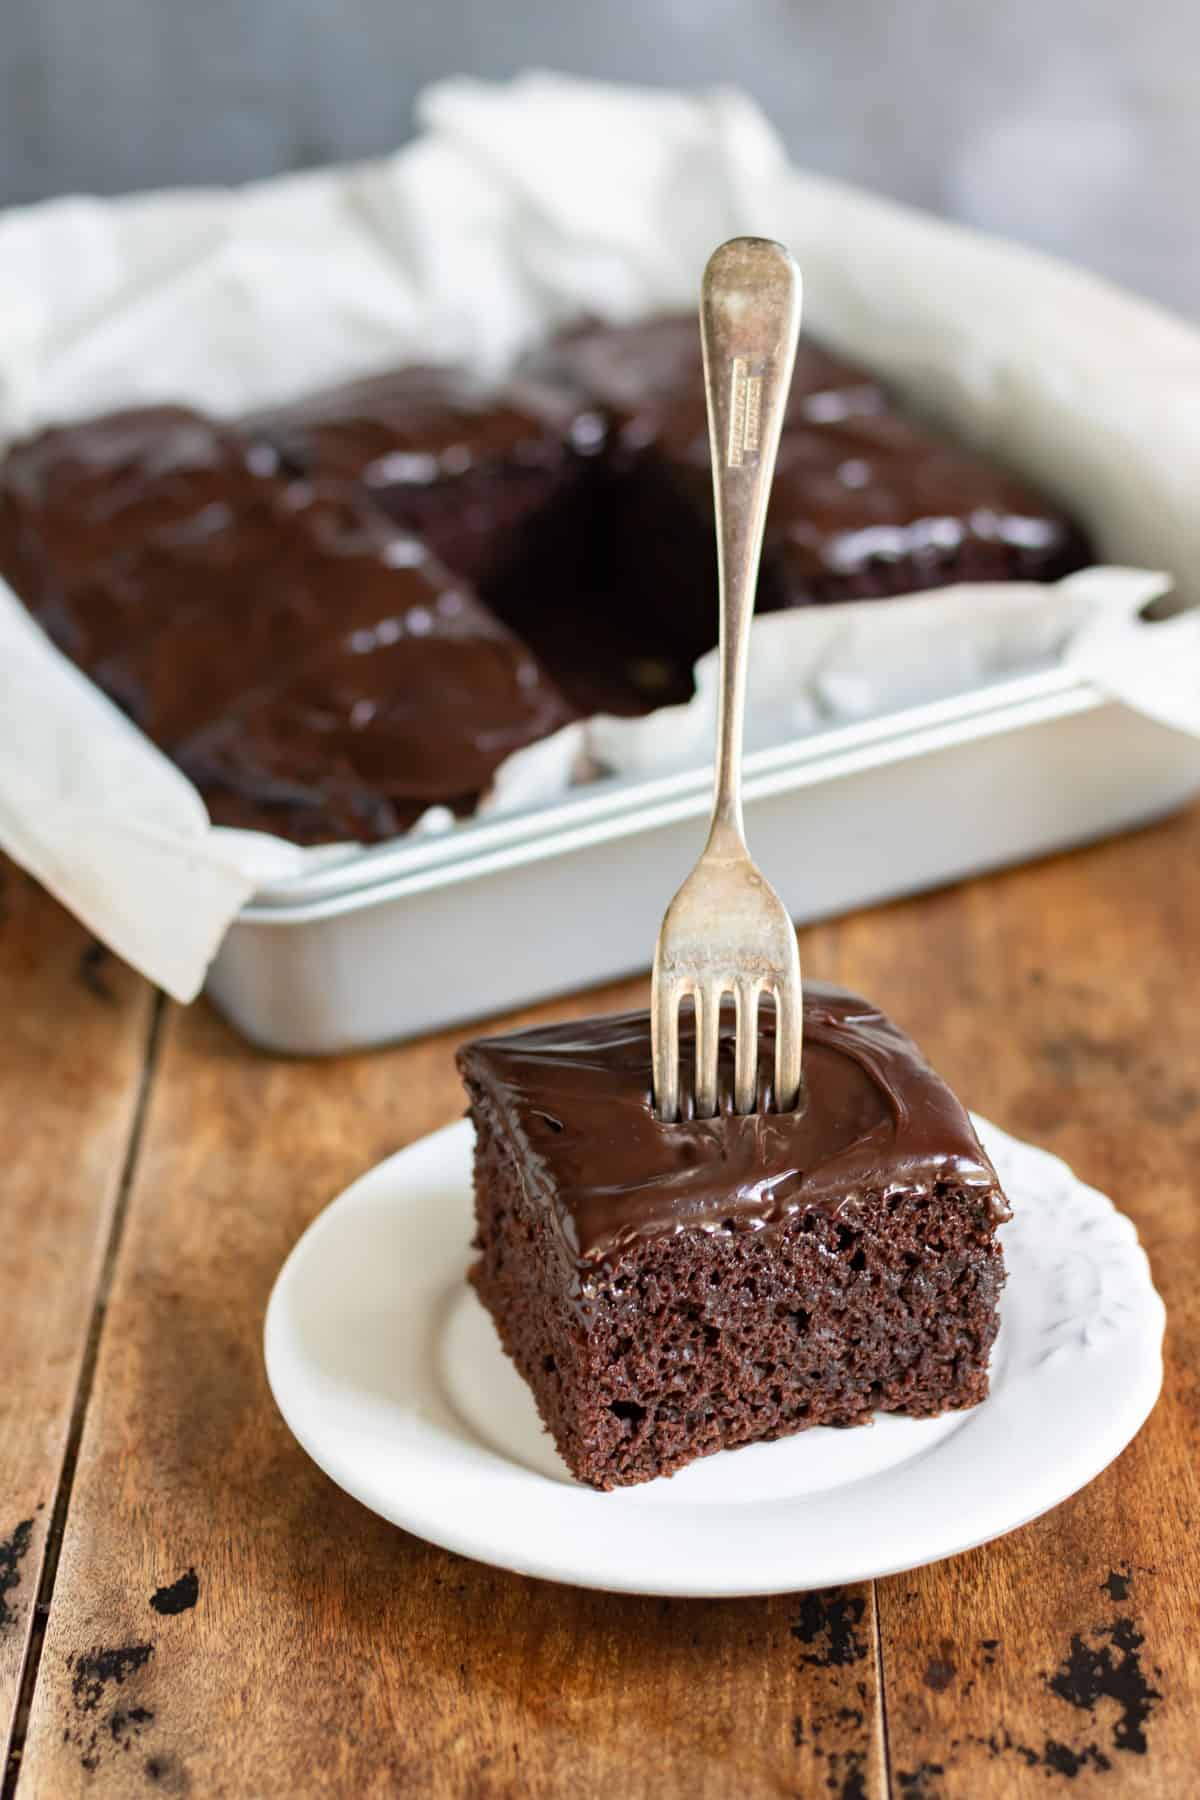 A fork sticking up in a square slice of chocolate crazy cake.